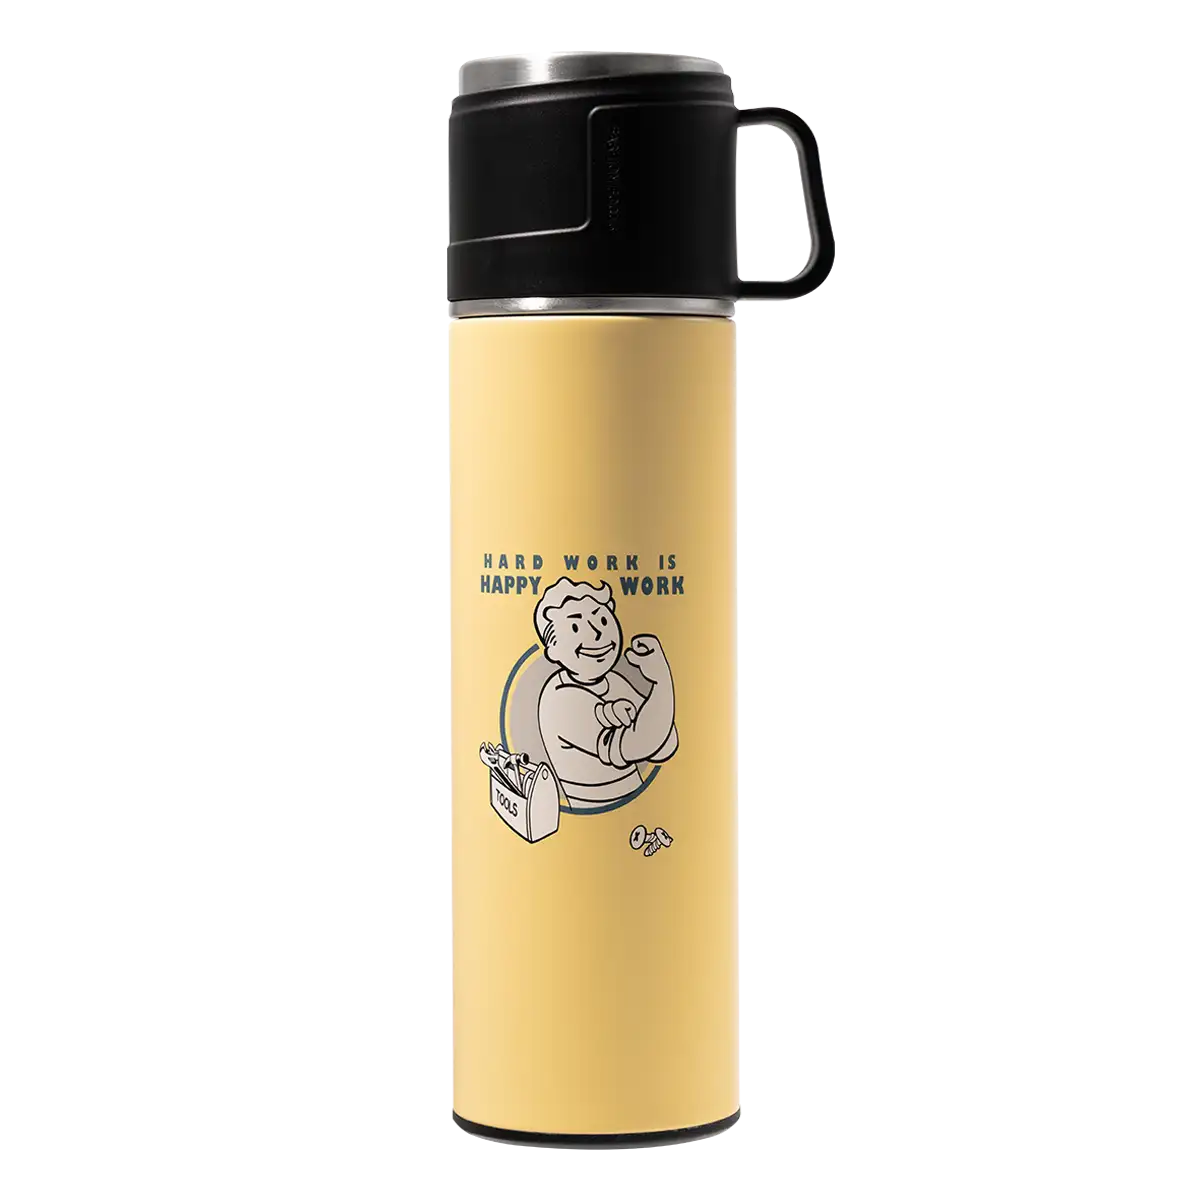 Fallout Insulated Bottle "Vault Tec" Image 3